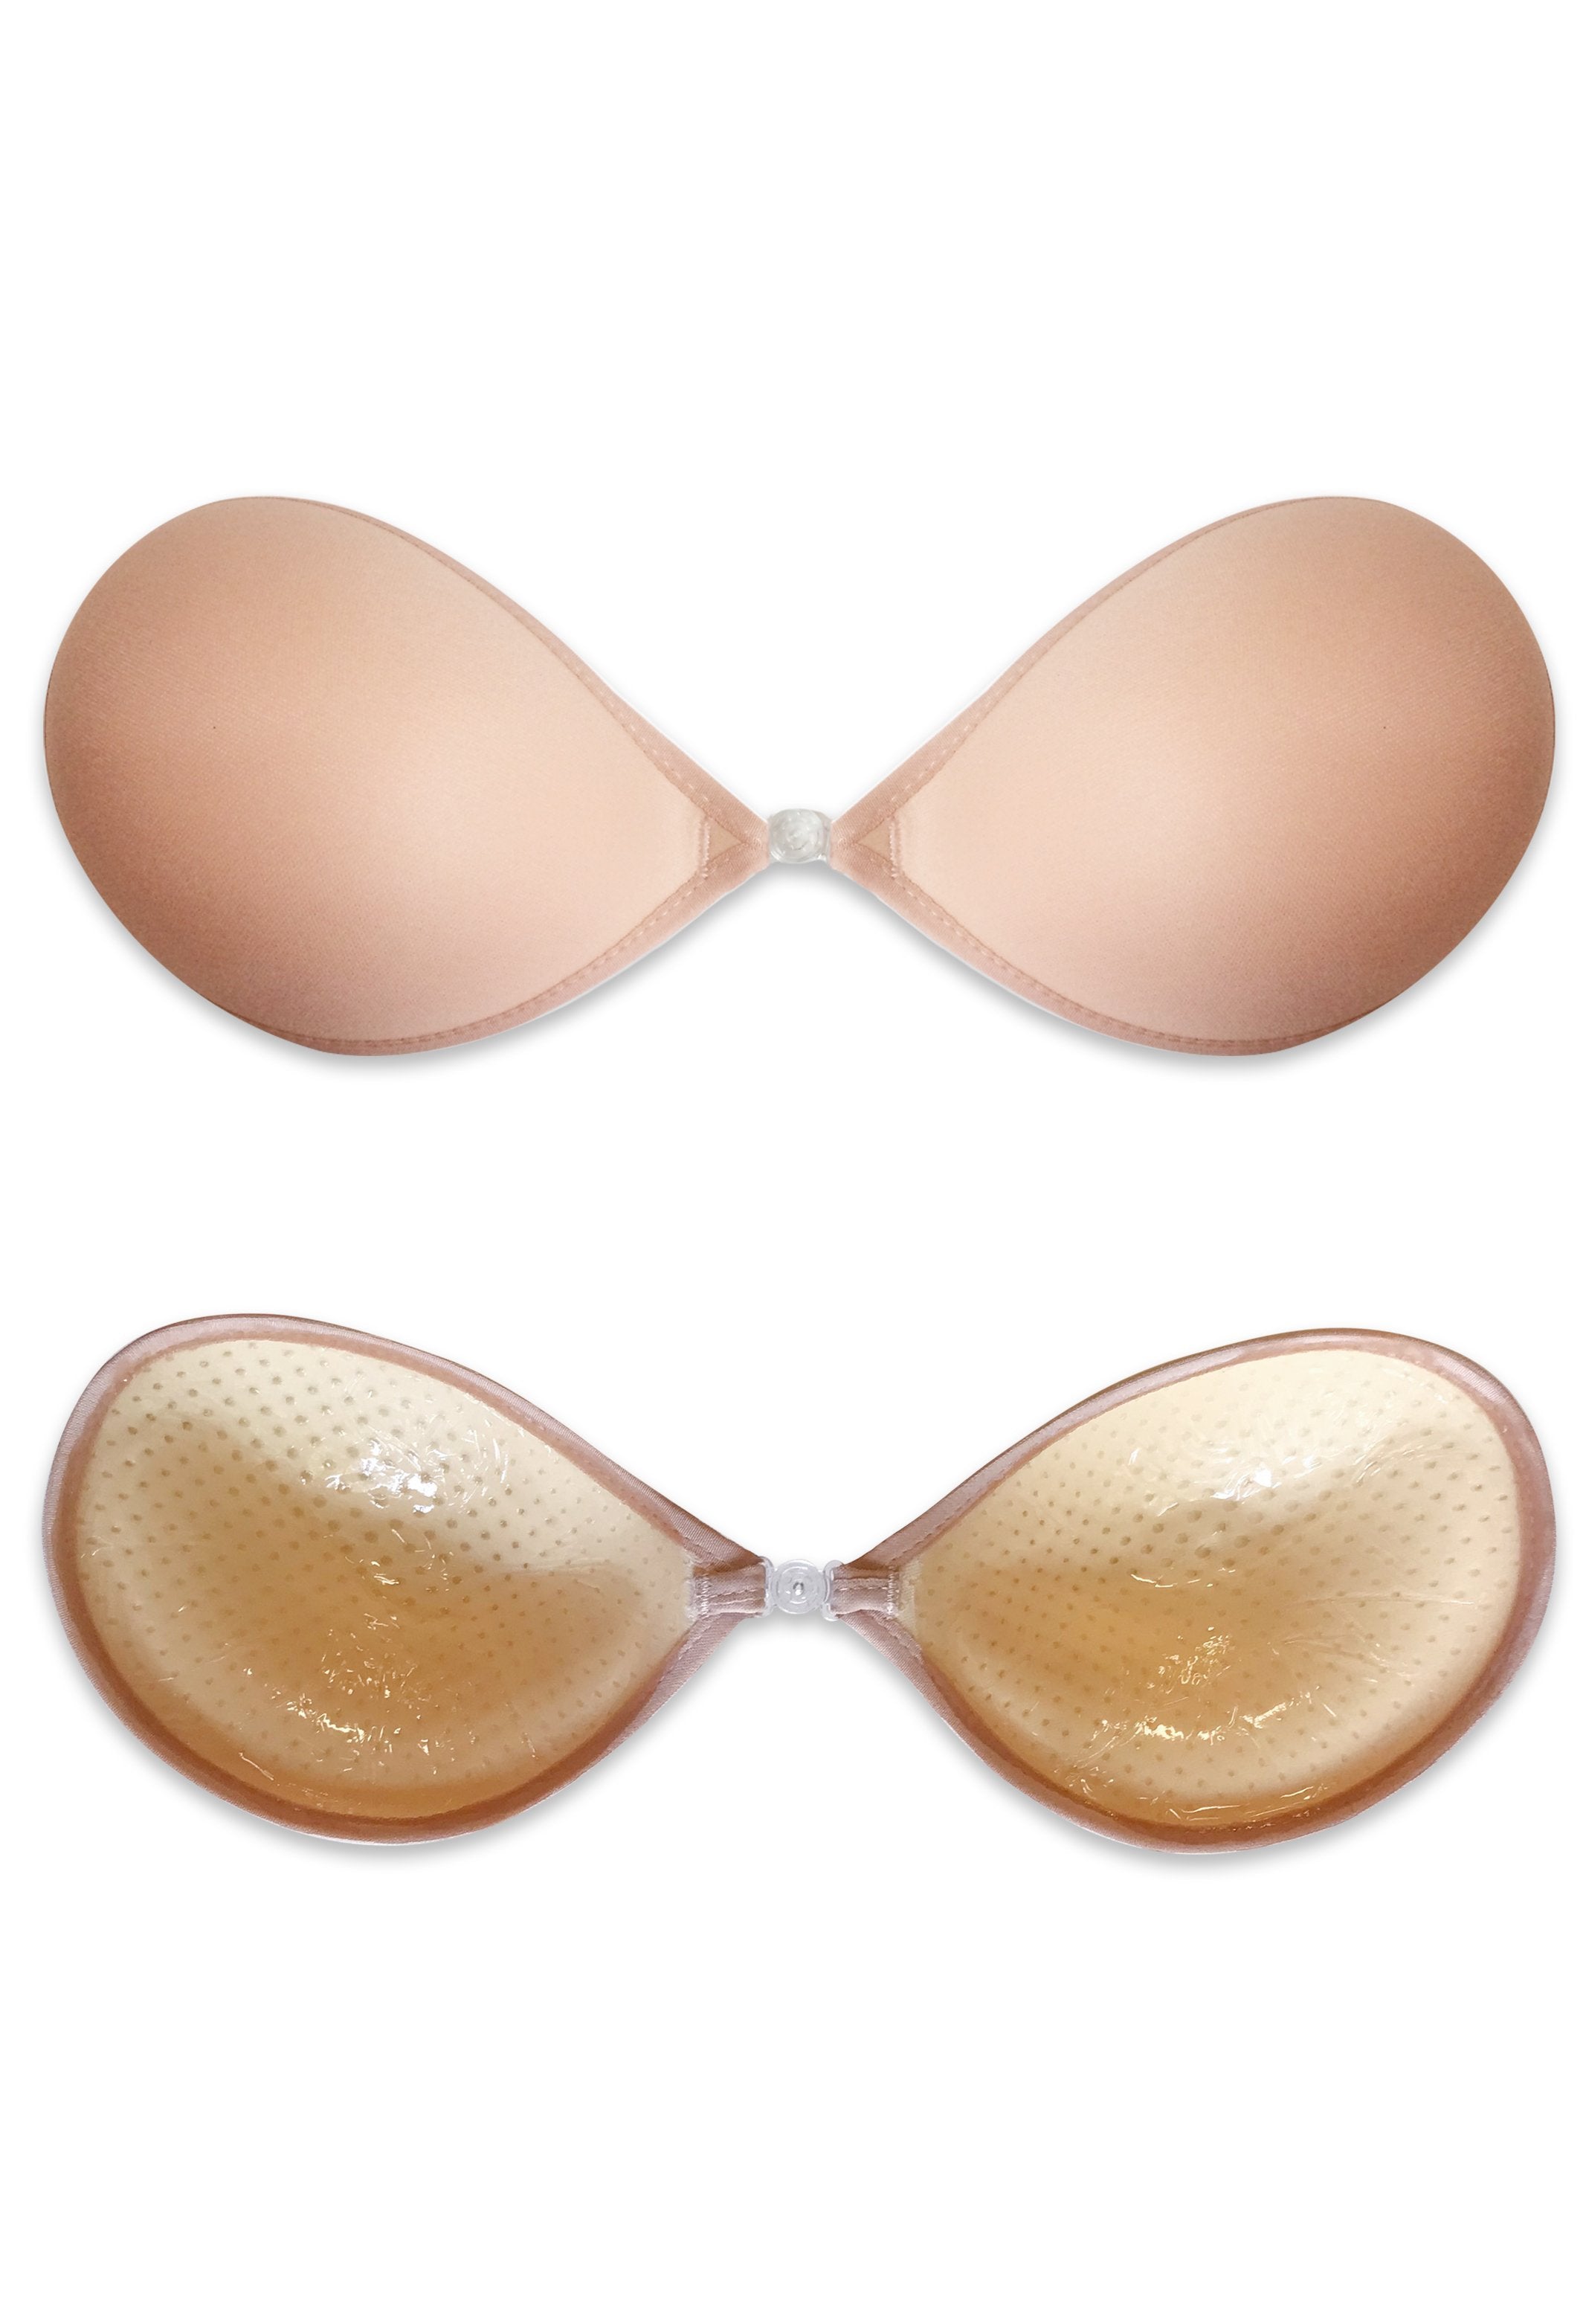 Adhesive Padded Sticky Bra with Straps